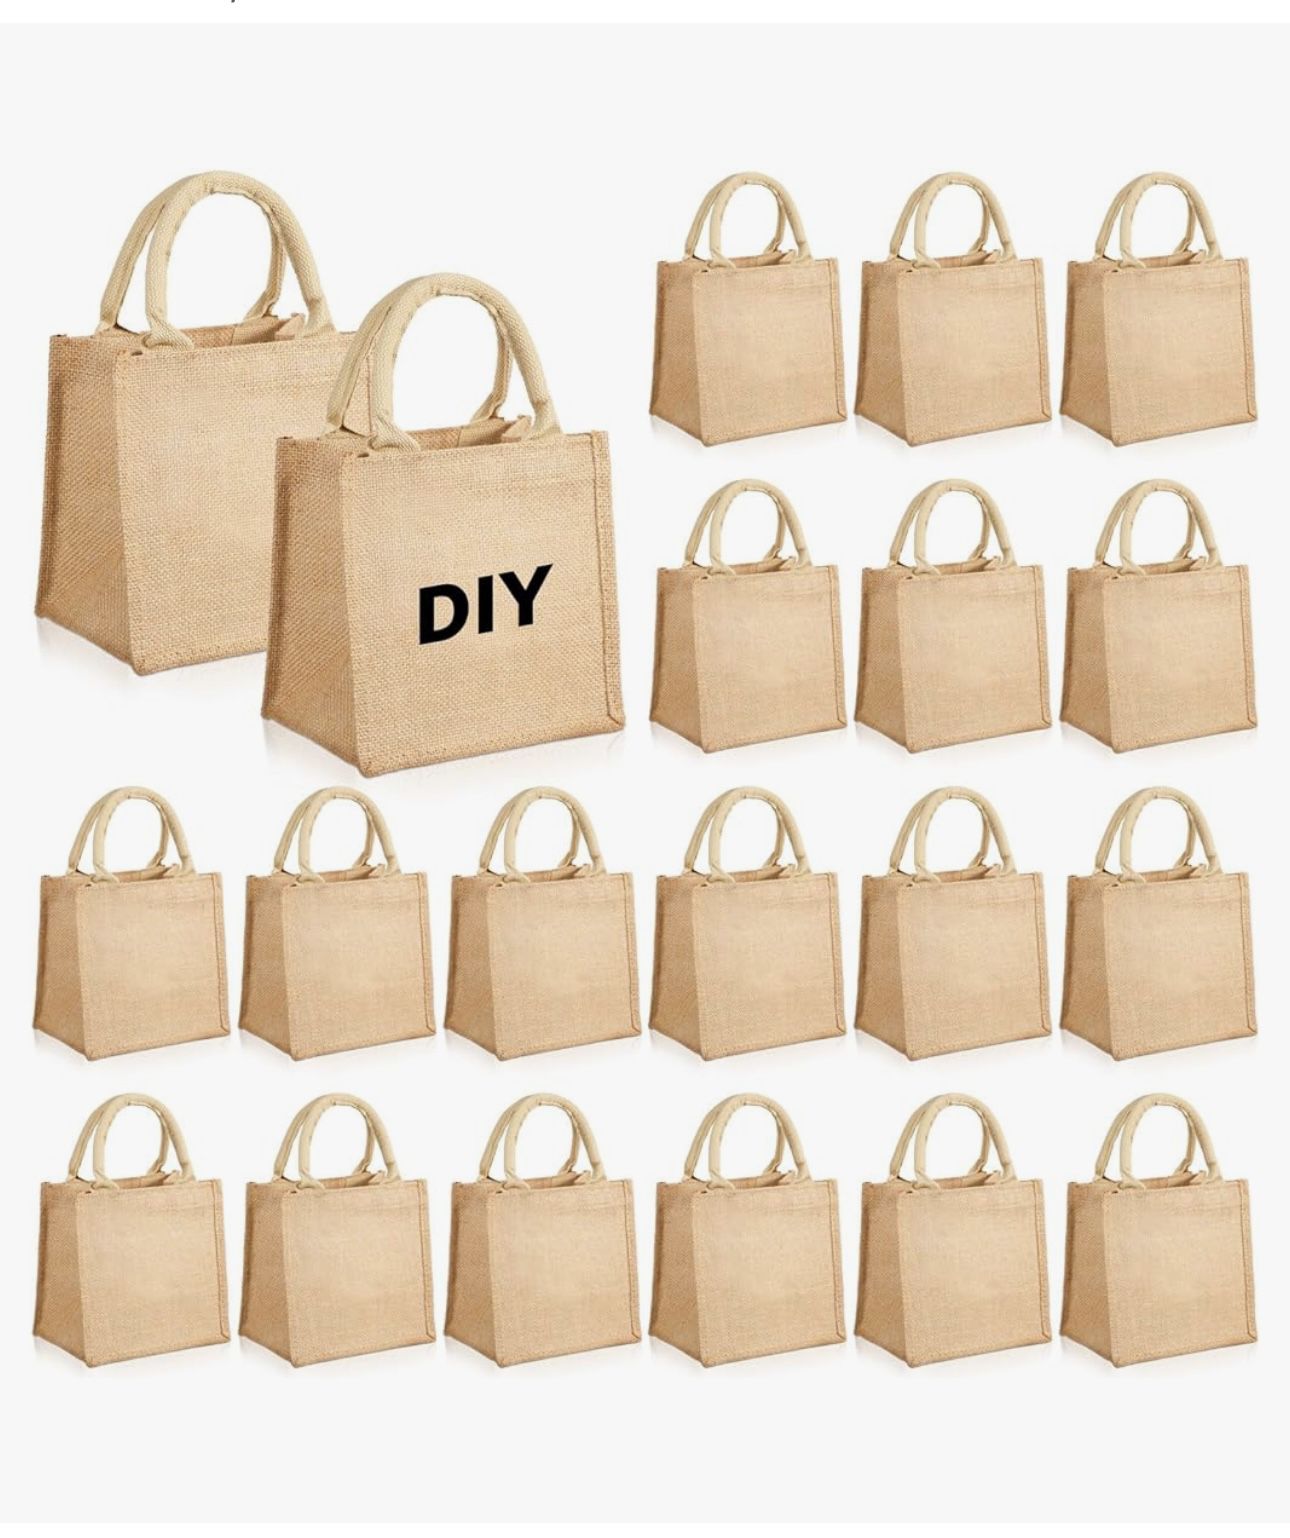 Burlap Tote Bags From Amazon 